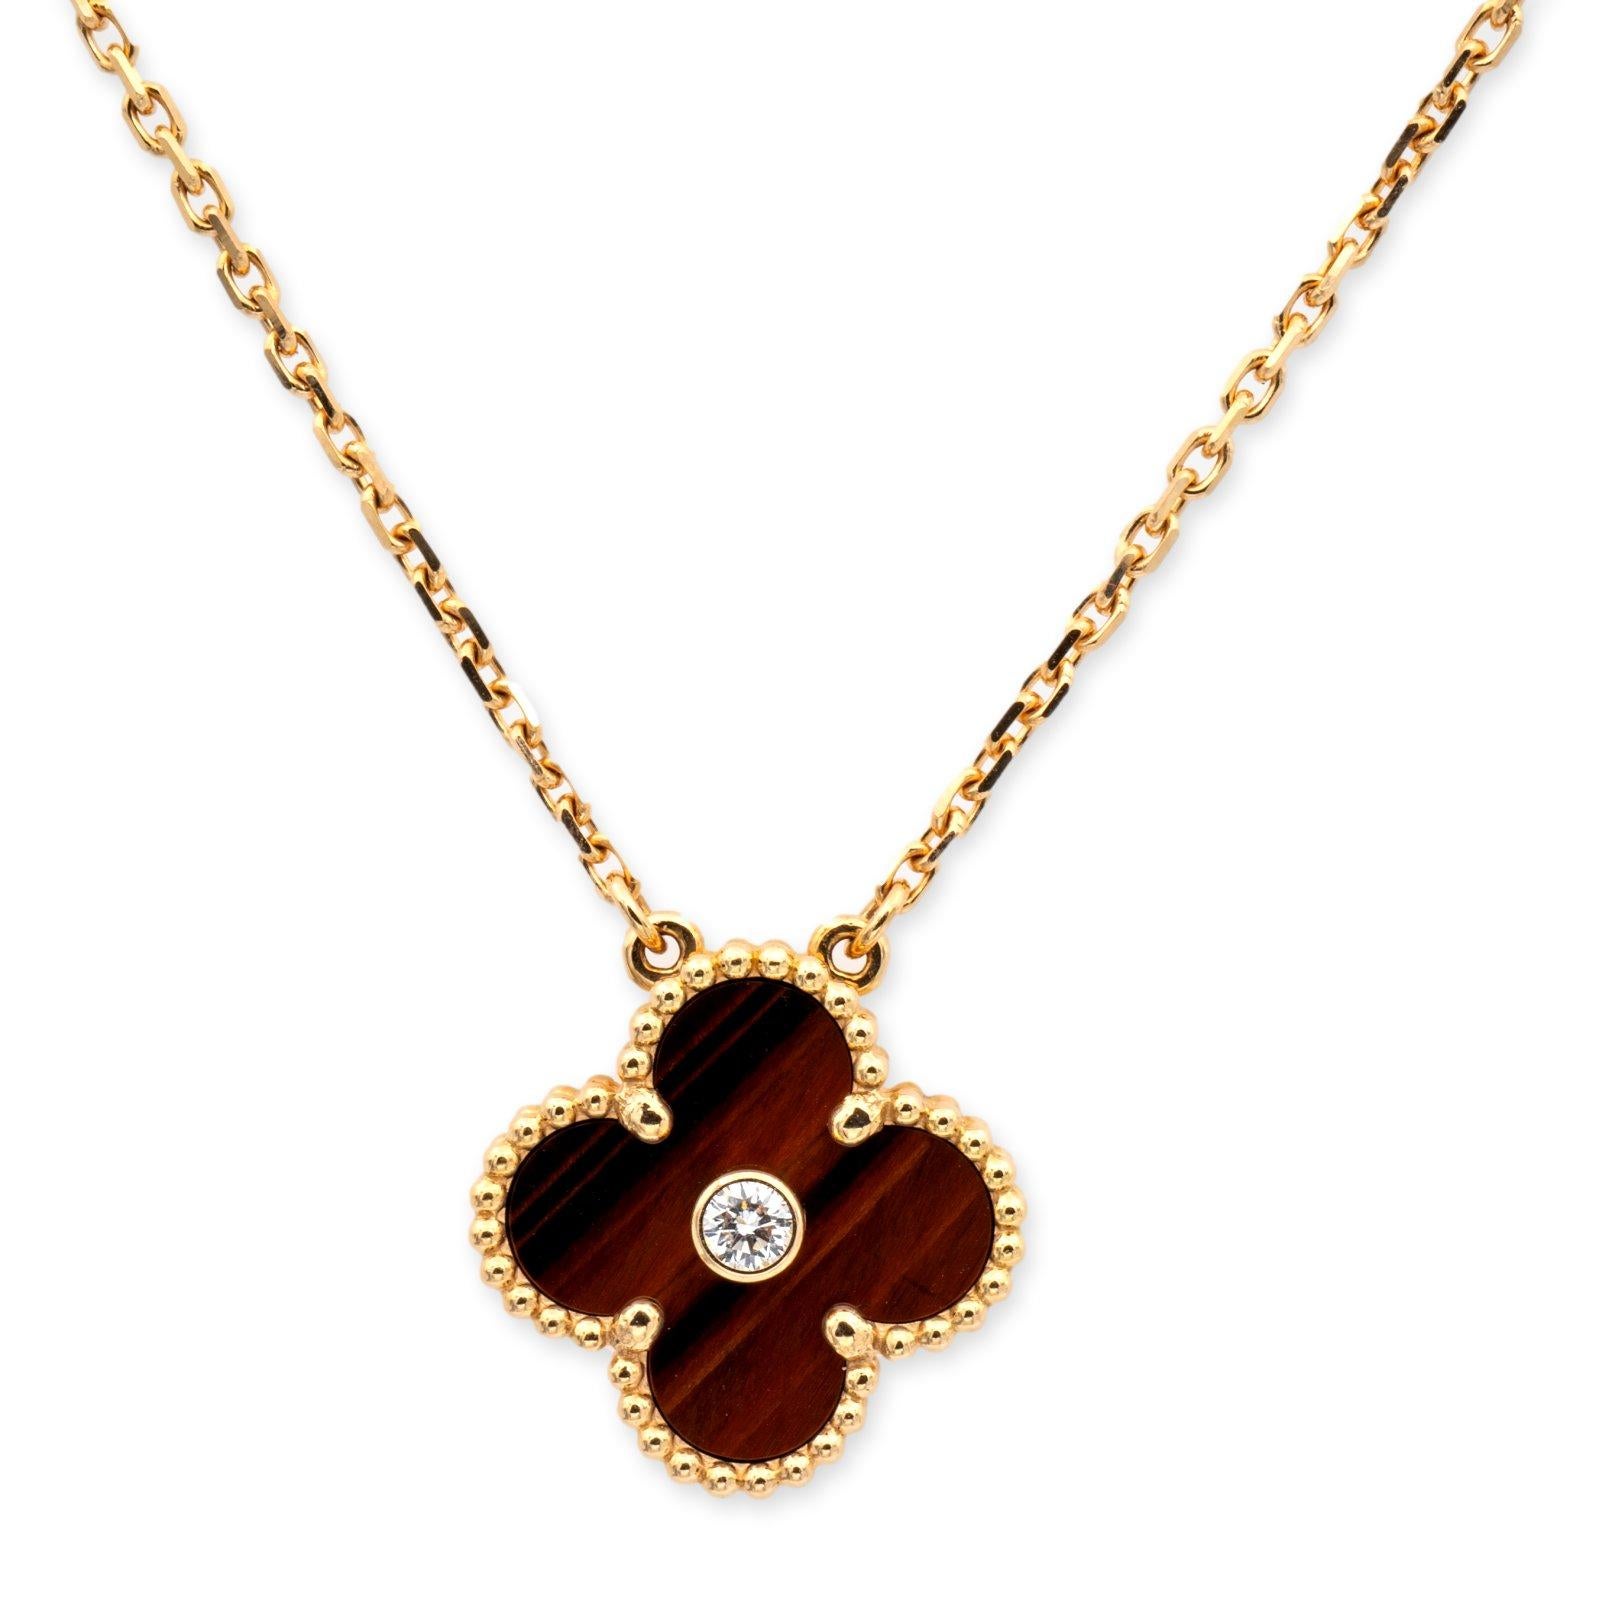 Van Cleef & Arpels necklace from the Vintage Alhambra collection finely crafted in 18 karat rose gold featuring a 15 mm four leaf Bulls-Eye clover motif with a center round  brilliant cut diamond weighing 0.05 cts. The pendant hanging off a 16 inch